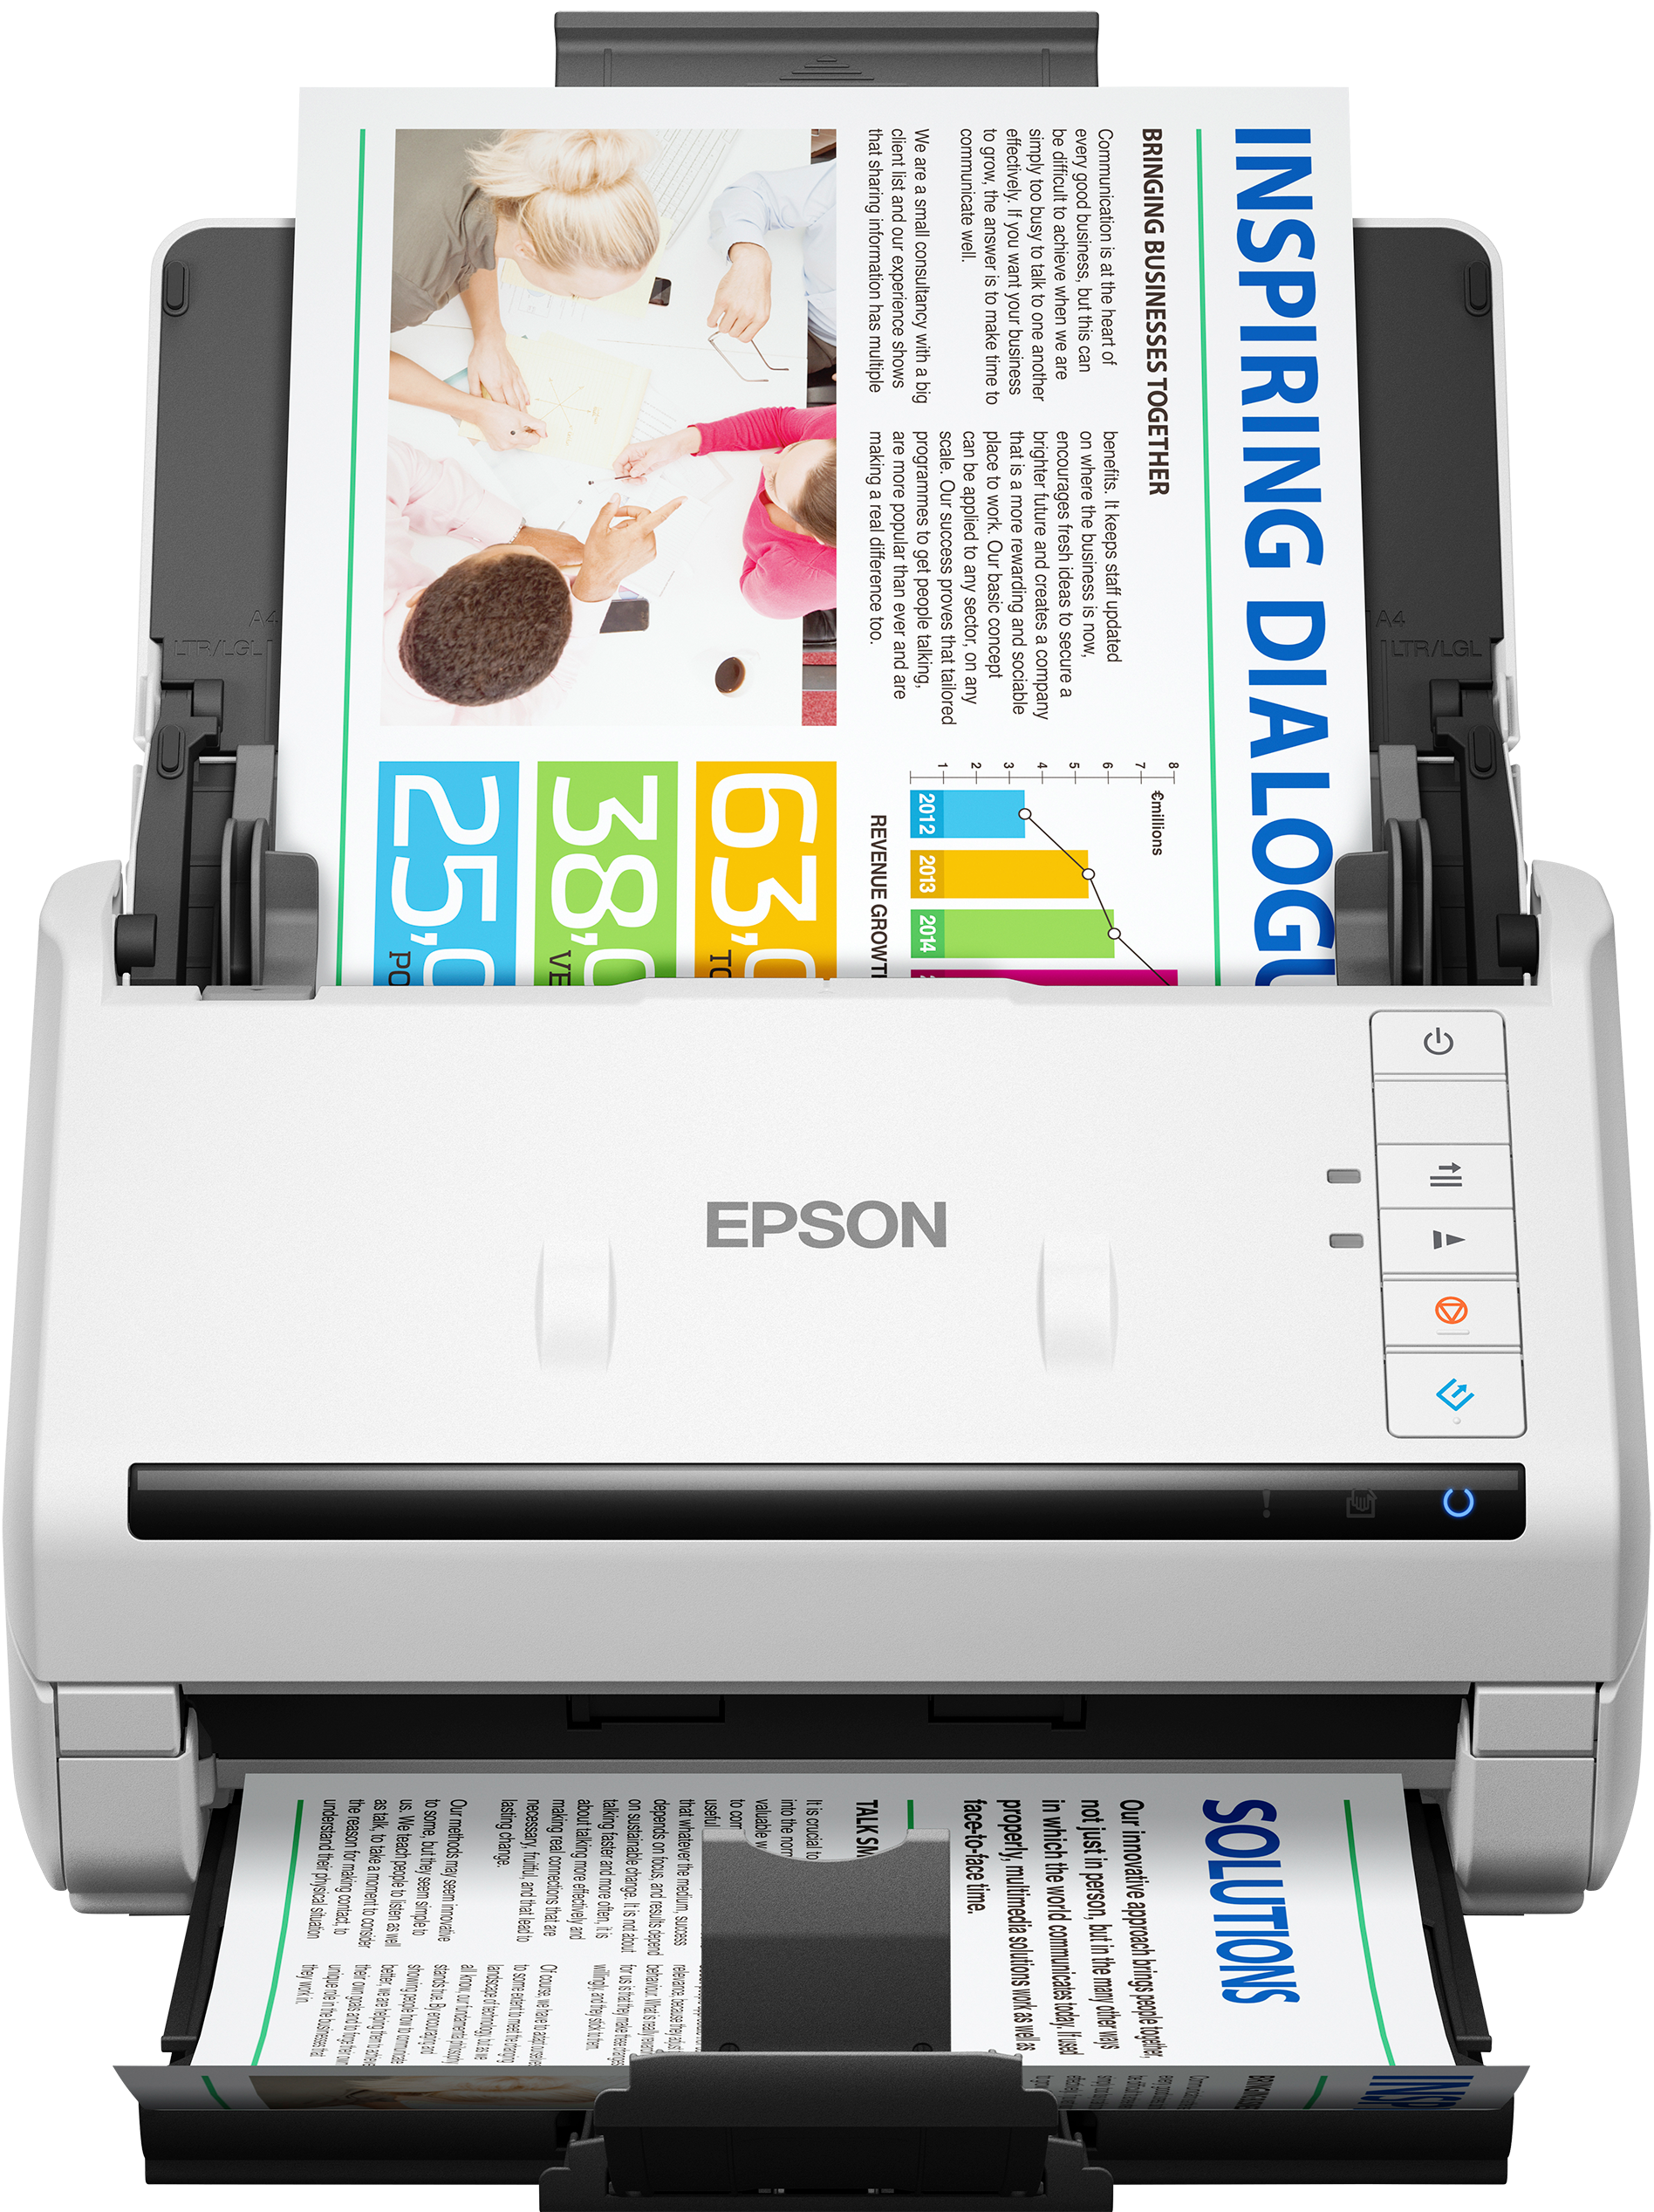 www.epson.rs